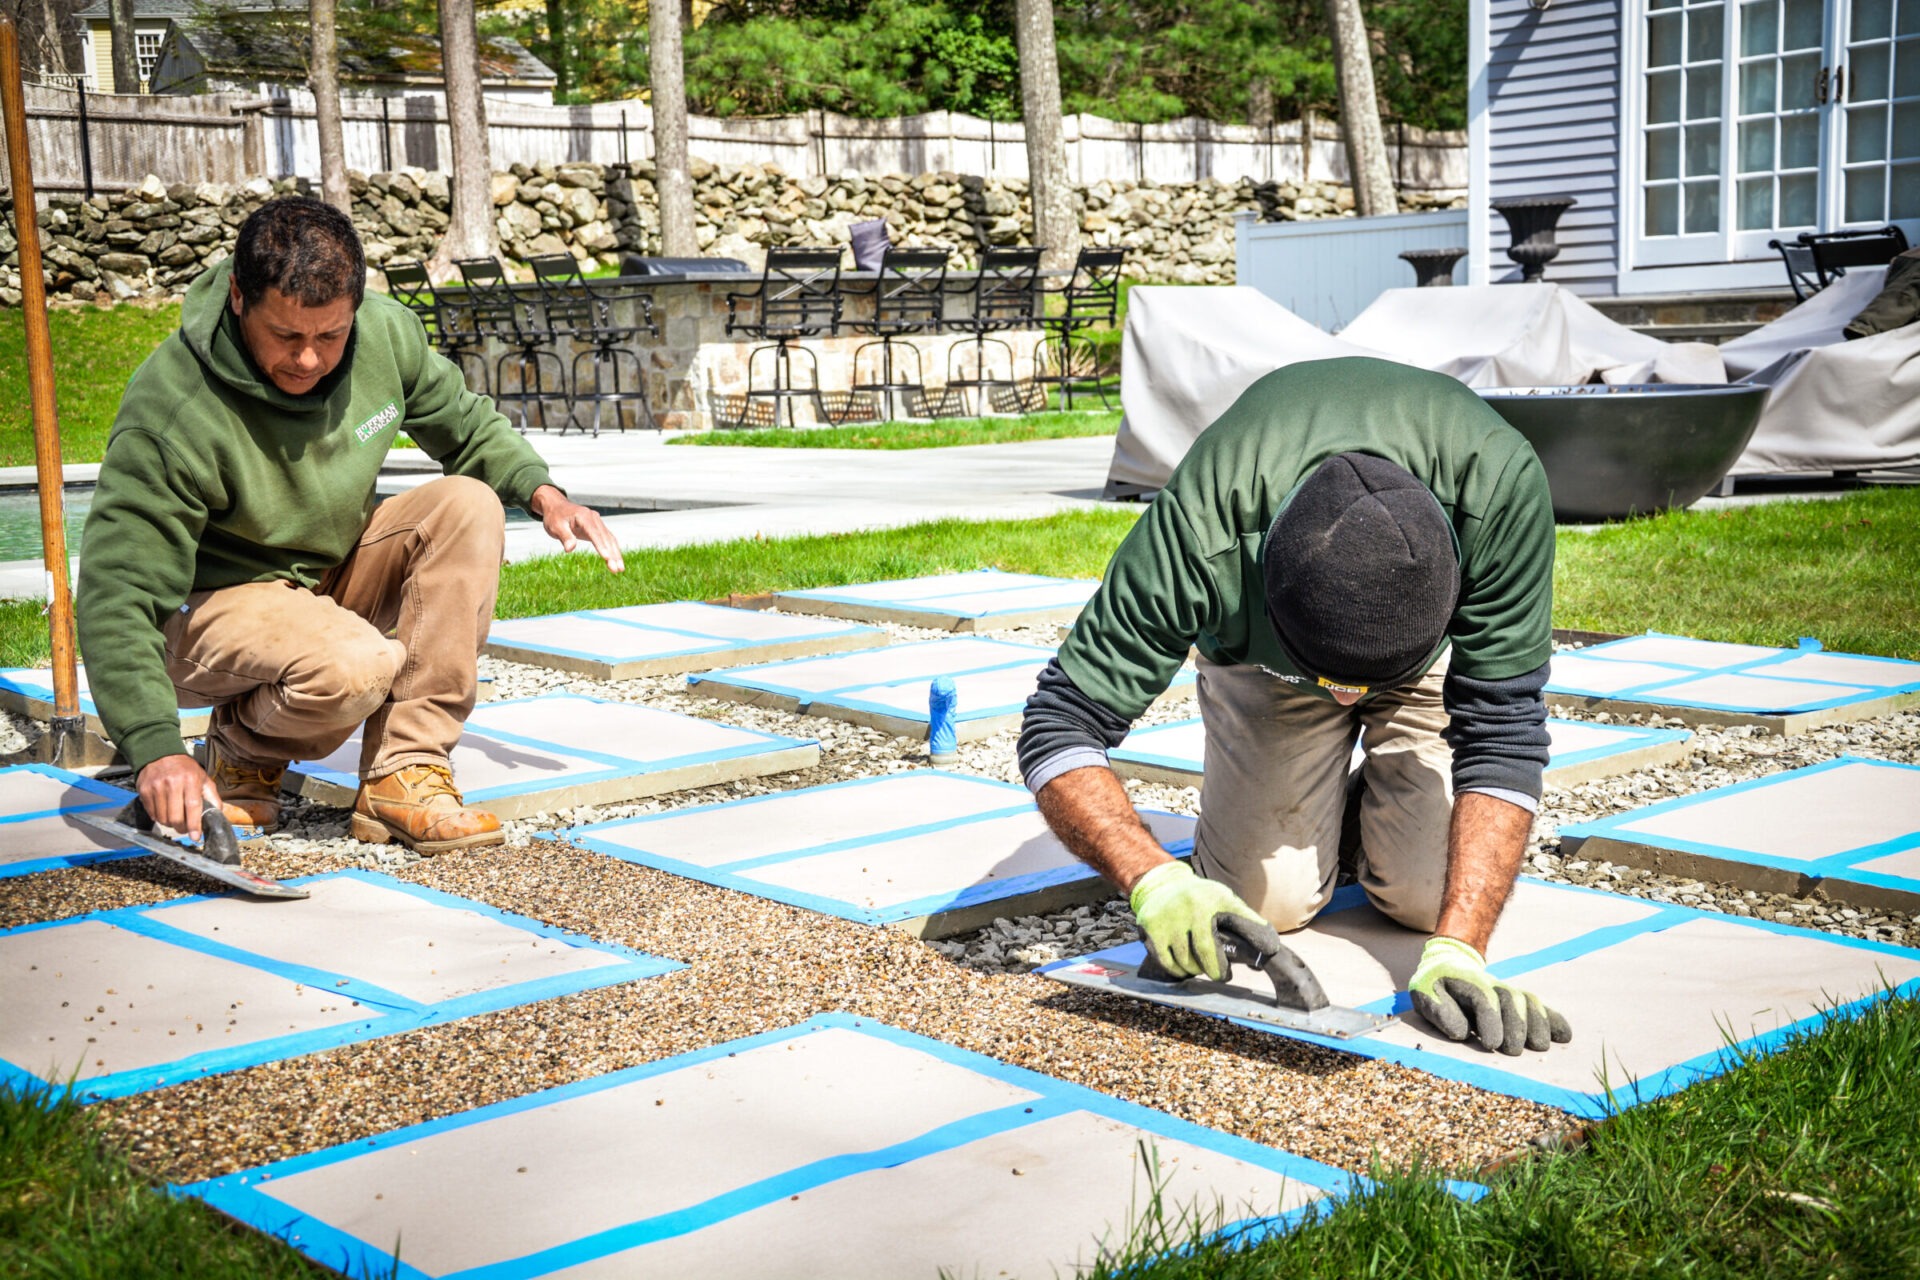 Two people are installing square pavers in a backyard, surrounded by greenery and outdoor furniture, on a sunny day with clear skies.